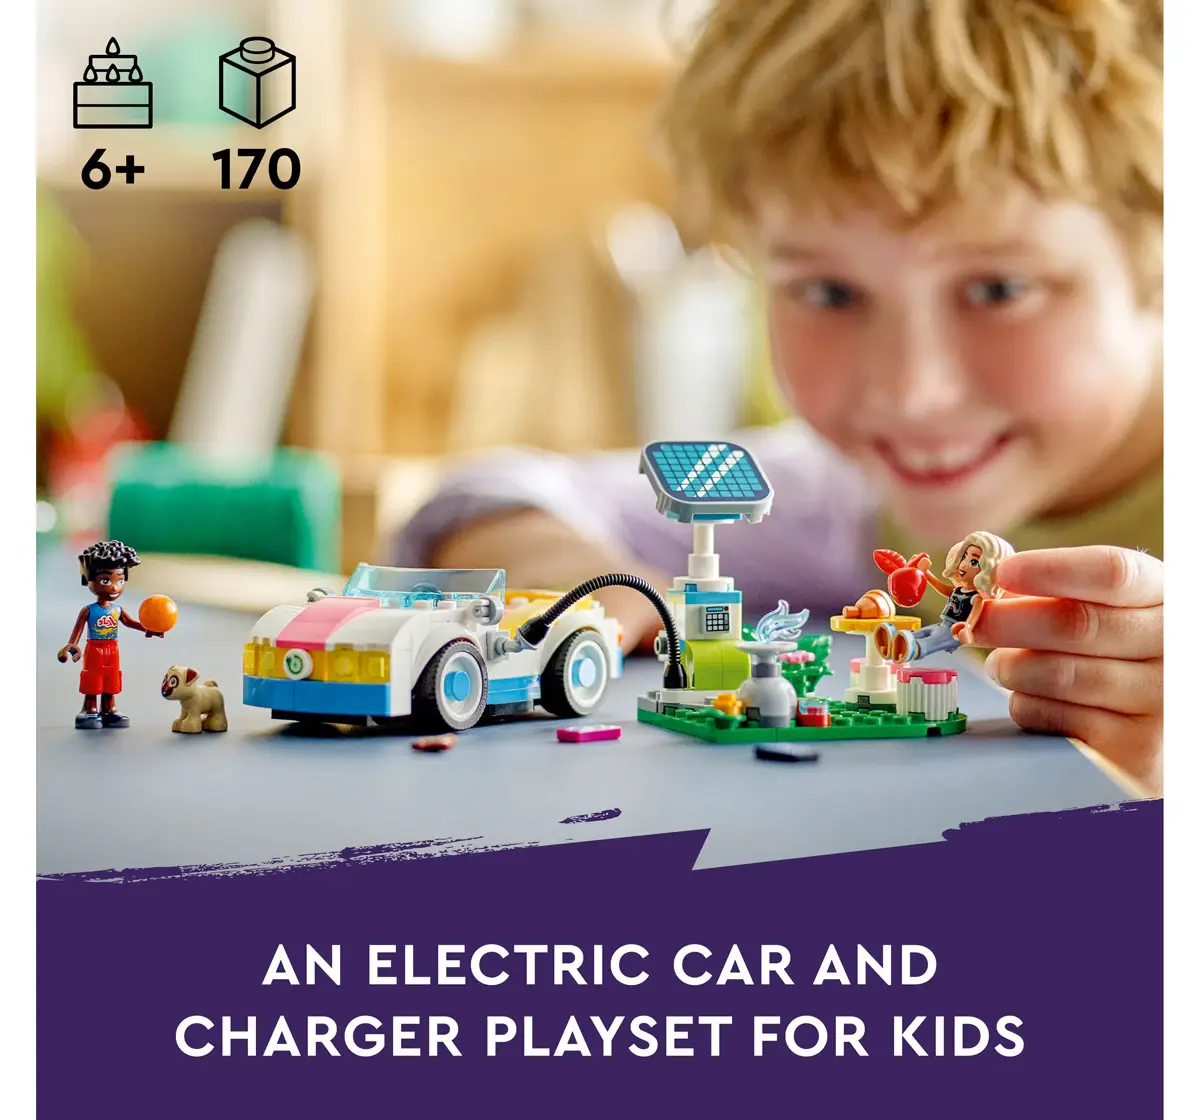 Lego Friends Electric Car And Charger Toy 42609 Multicolour For Kids Ages 6Y+ (170 Pieces) 